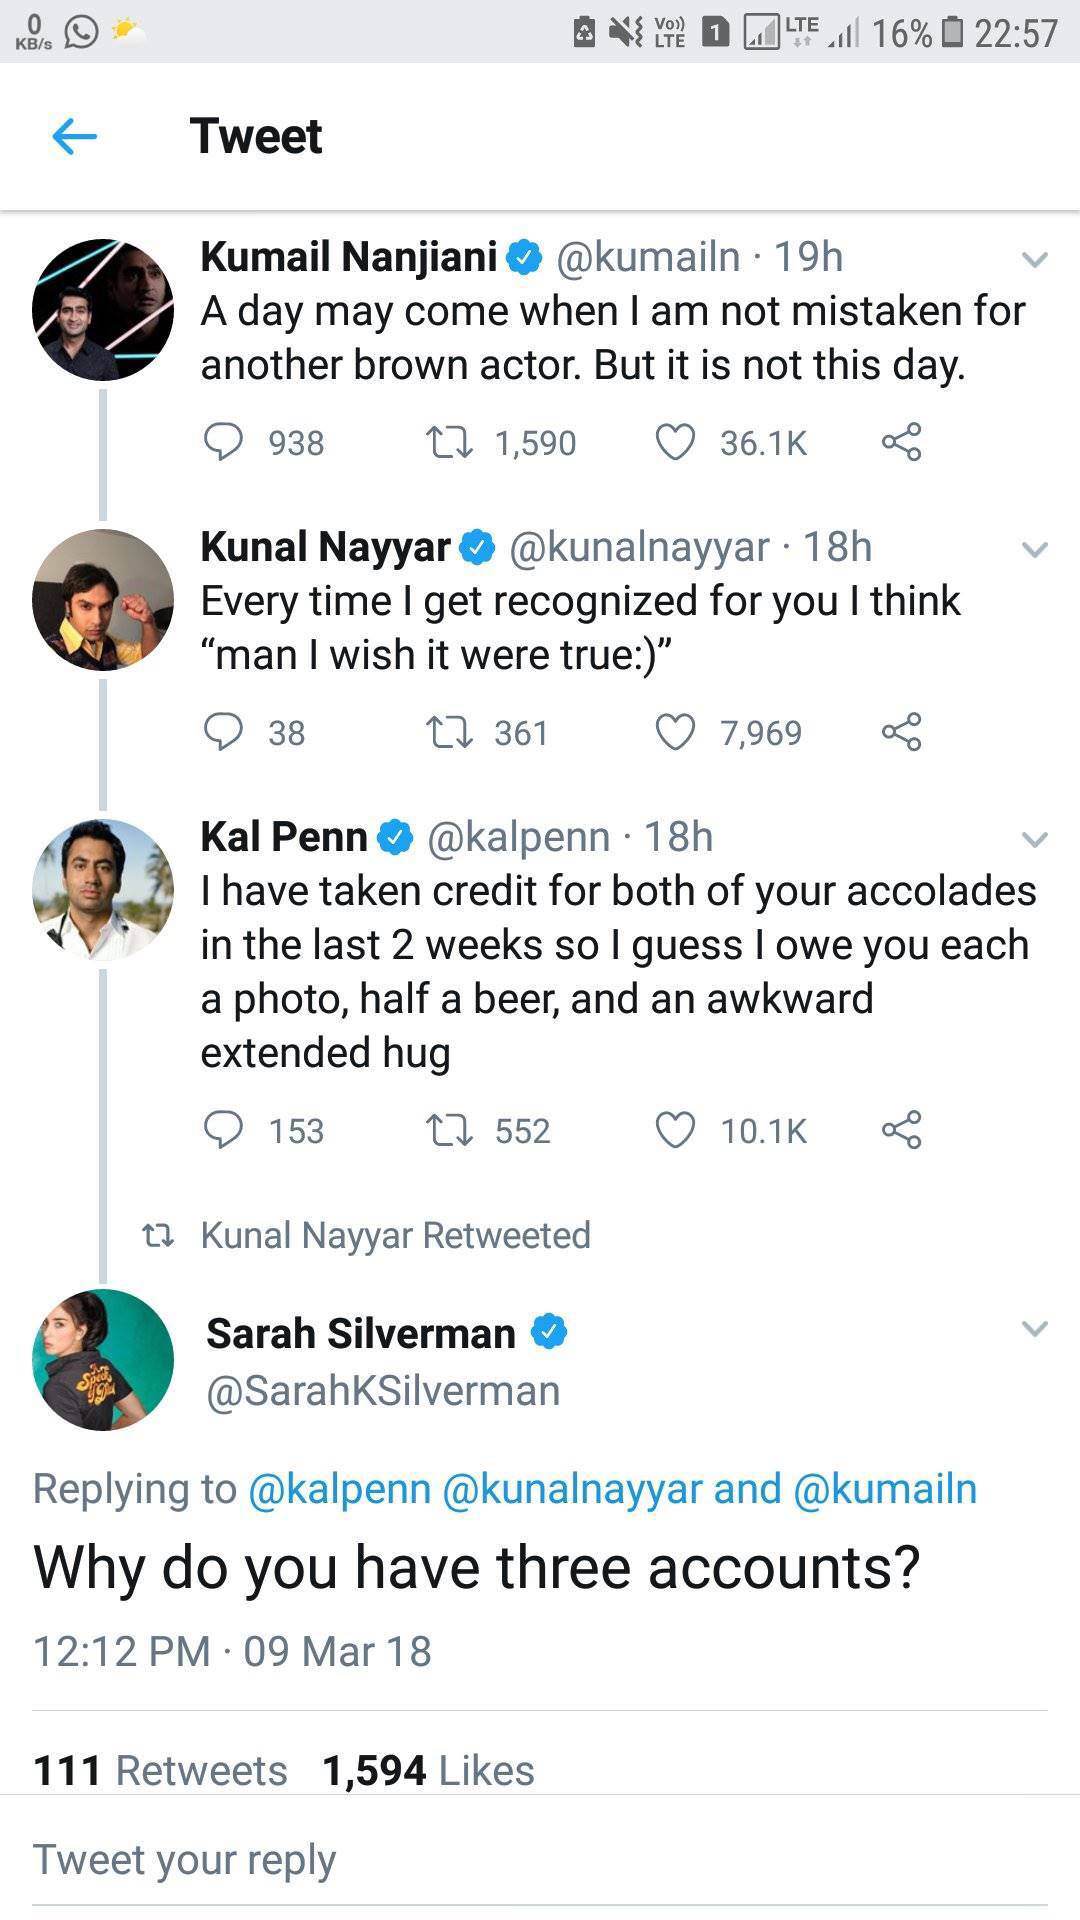 memes-  sarah silverman kal penn twitter - A Wyob Date % Tweet Kumail Nanjiani 19h A day may come when I am not mistaken for another brown actor. But it is not this day. 938 Cz 1,590 loh Kunal Nayyar 18h Every time I get recognized for you I think man I w